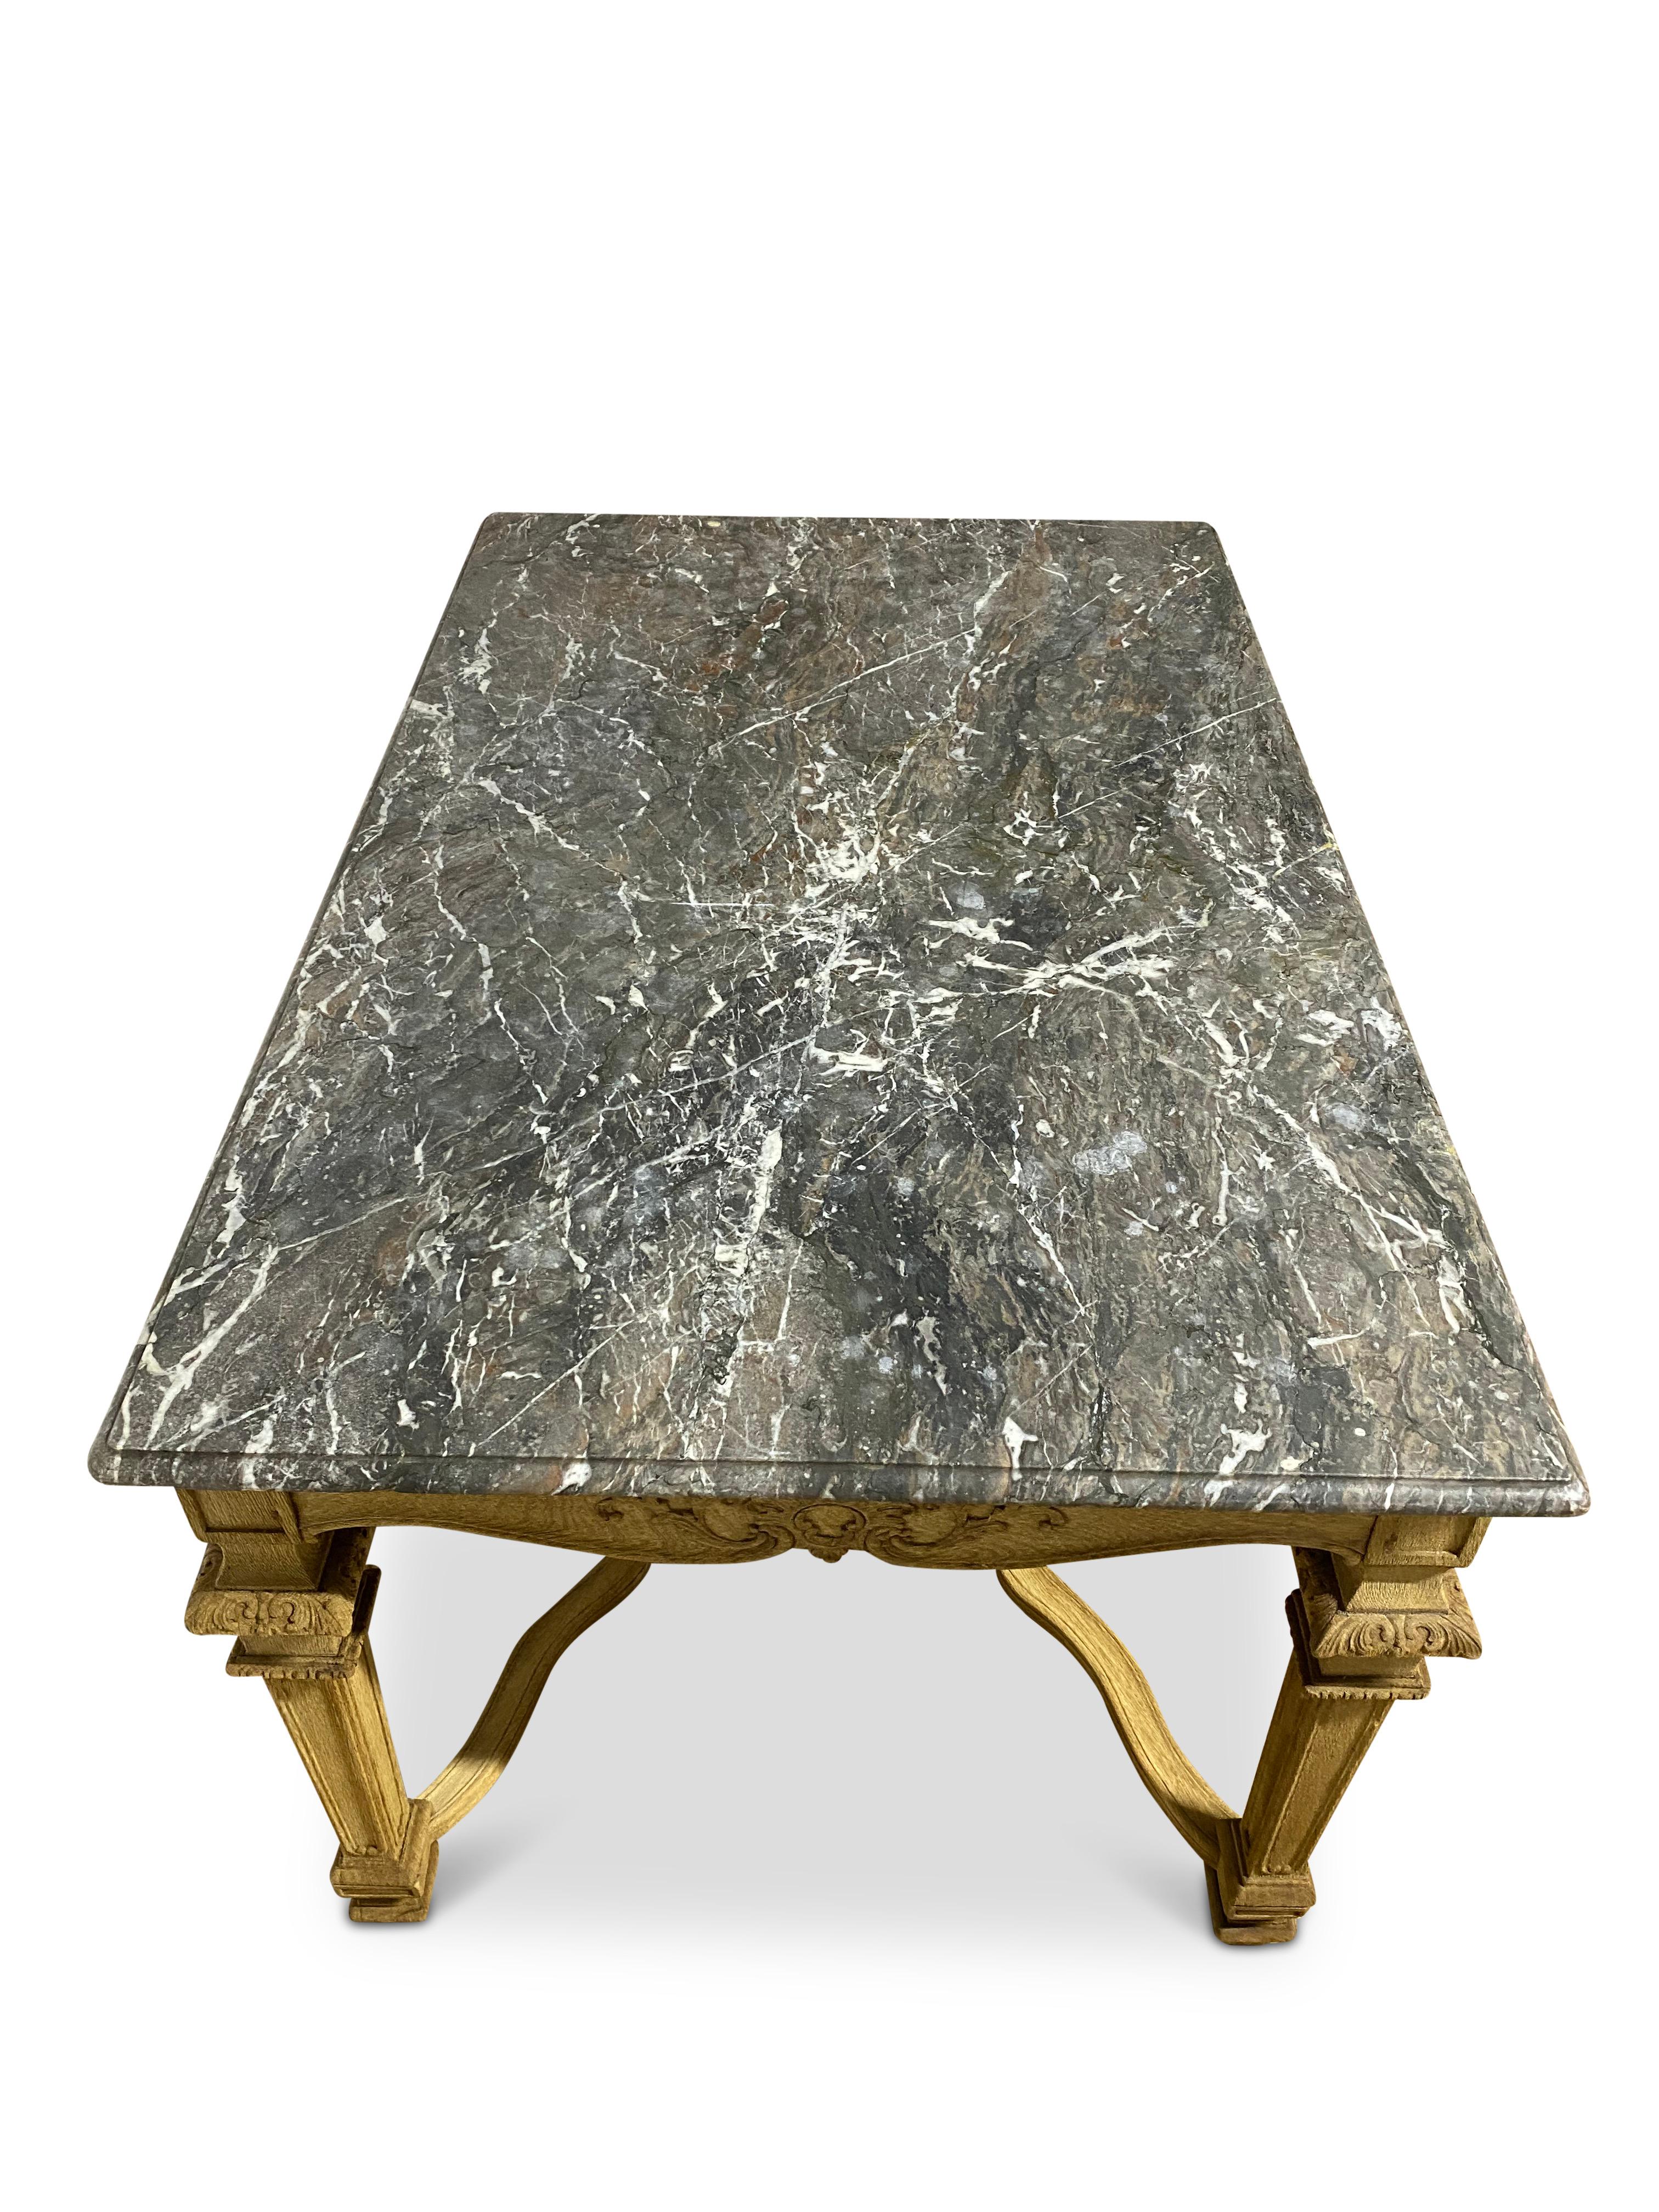 French Provincial Center Table with Original Breccia Marble Top In Good Condition For Sale In Edenbridge, GB